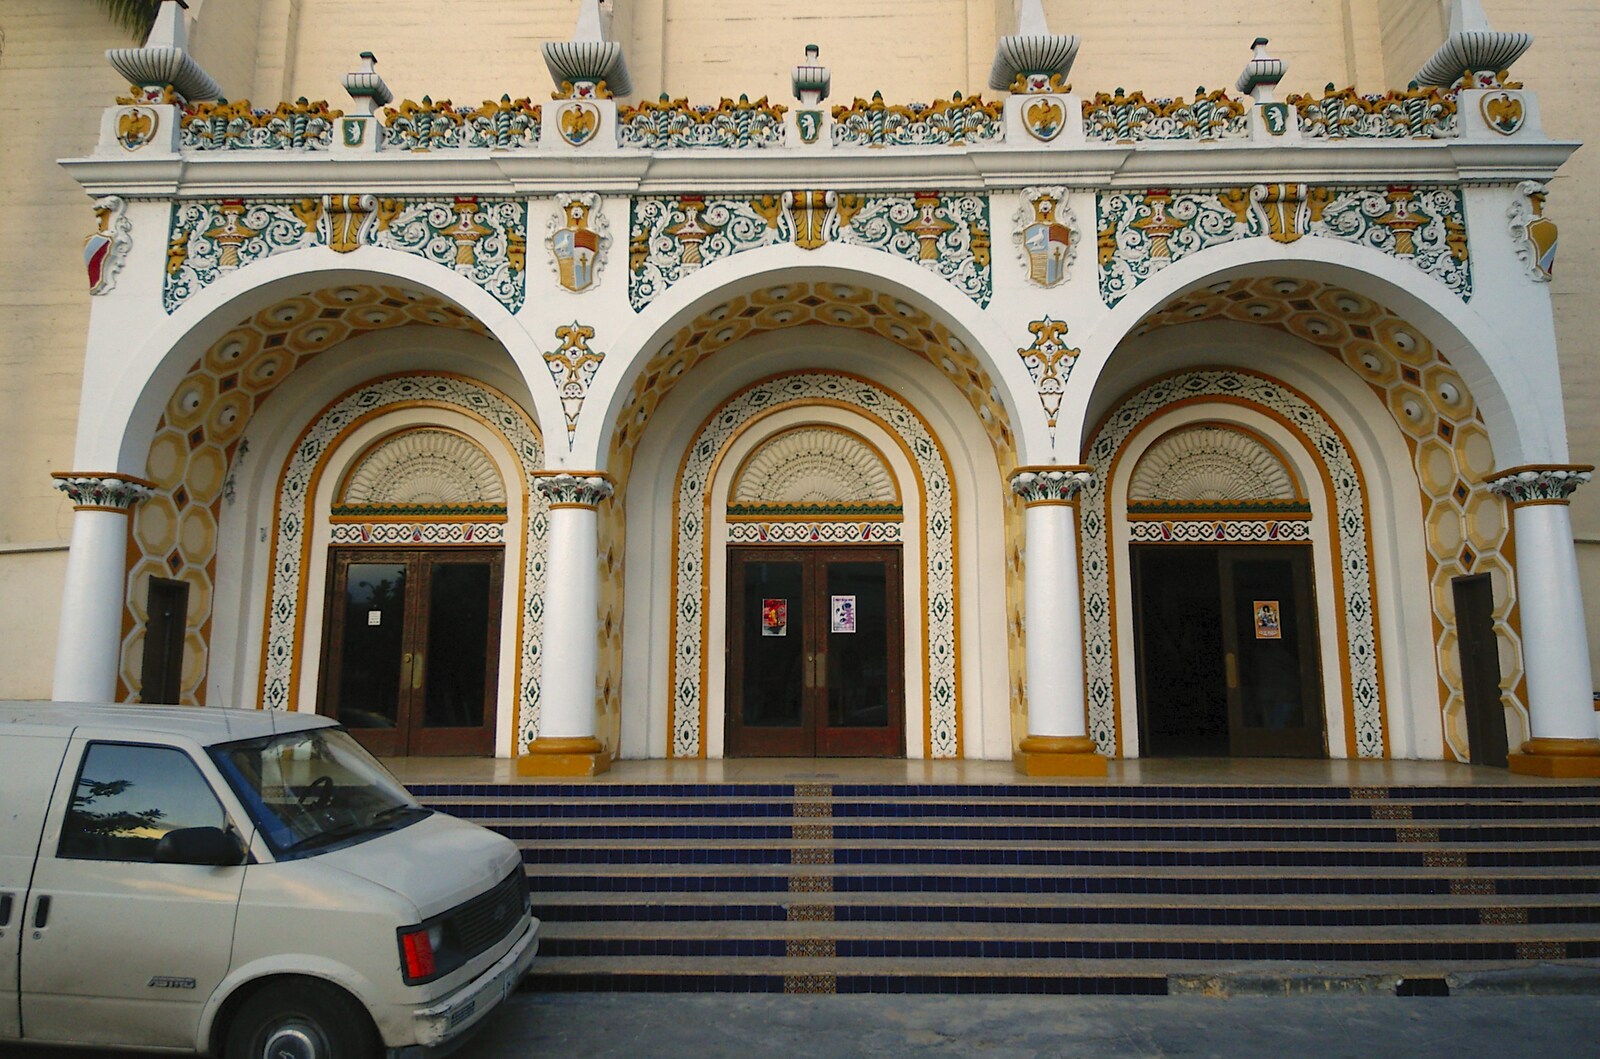 Ornate building entrance from A Trip to Tijuana, Mexico - 25th March 2006